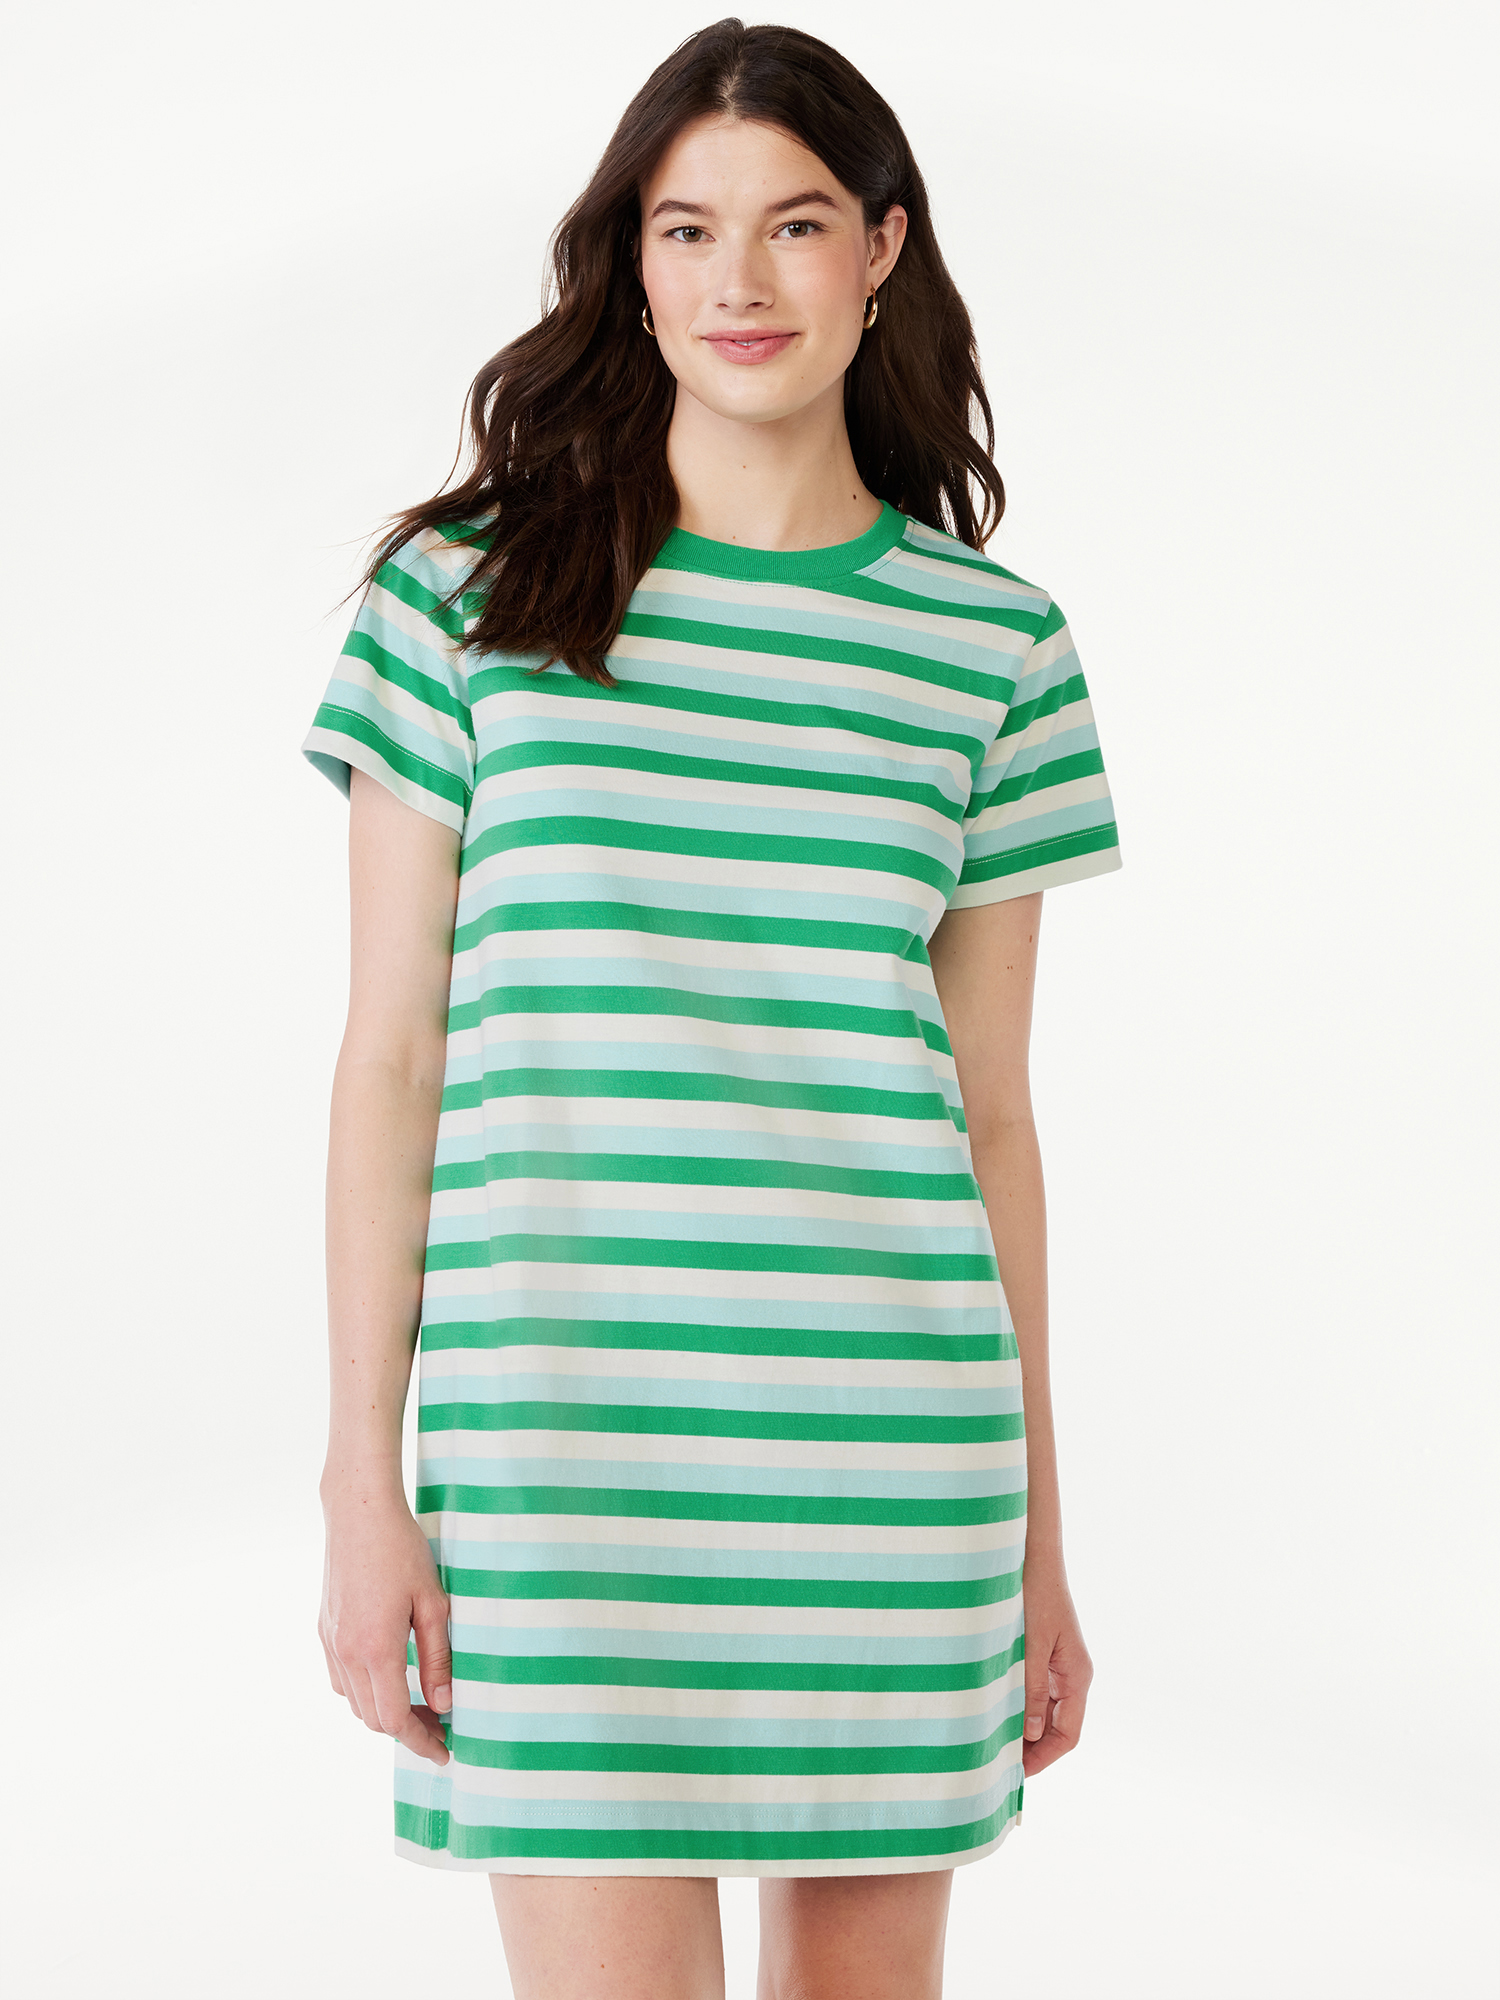 Free Assembly Women's Mini T-Shirt Dress with Short Sleeves, Sizes XS-XXXL - image 1 of 6